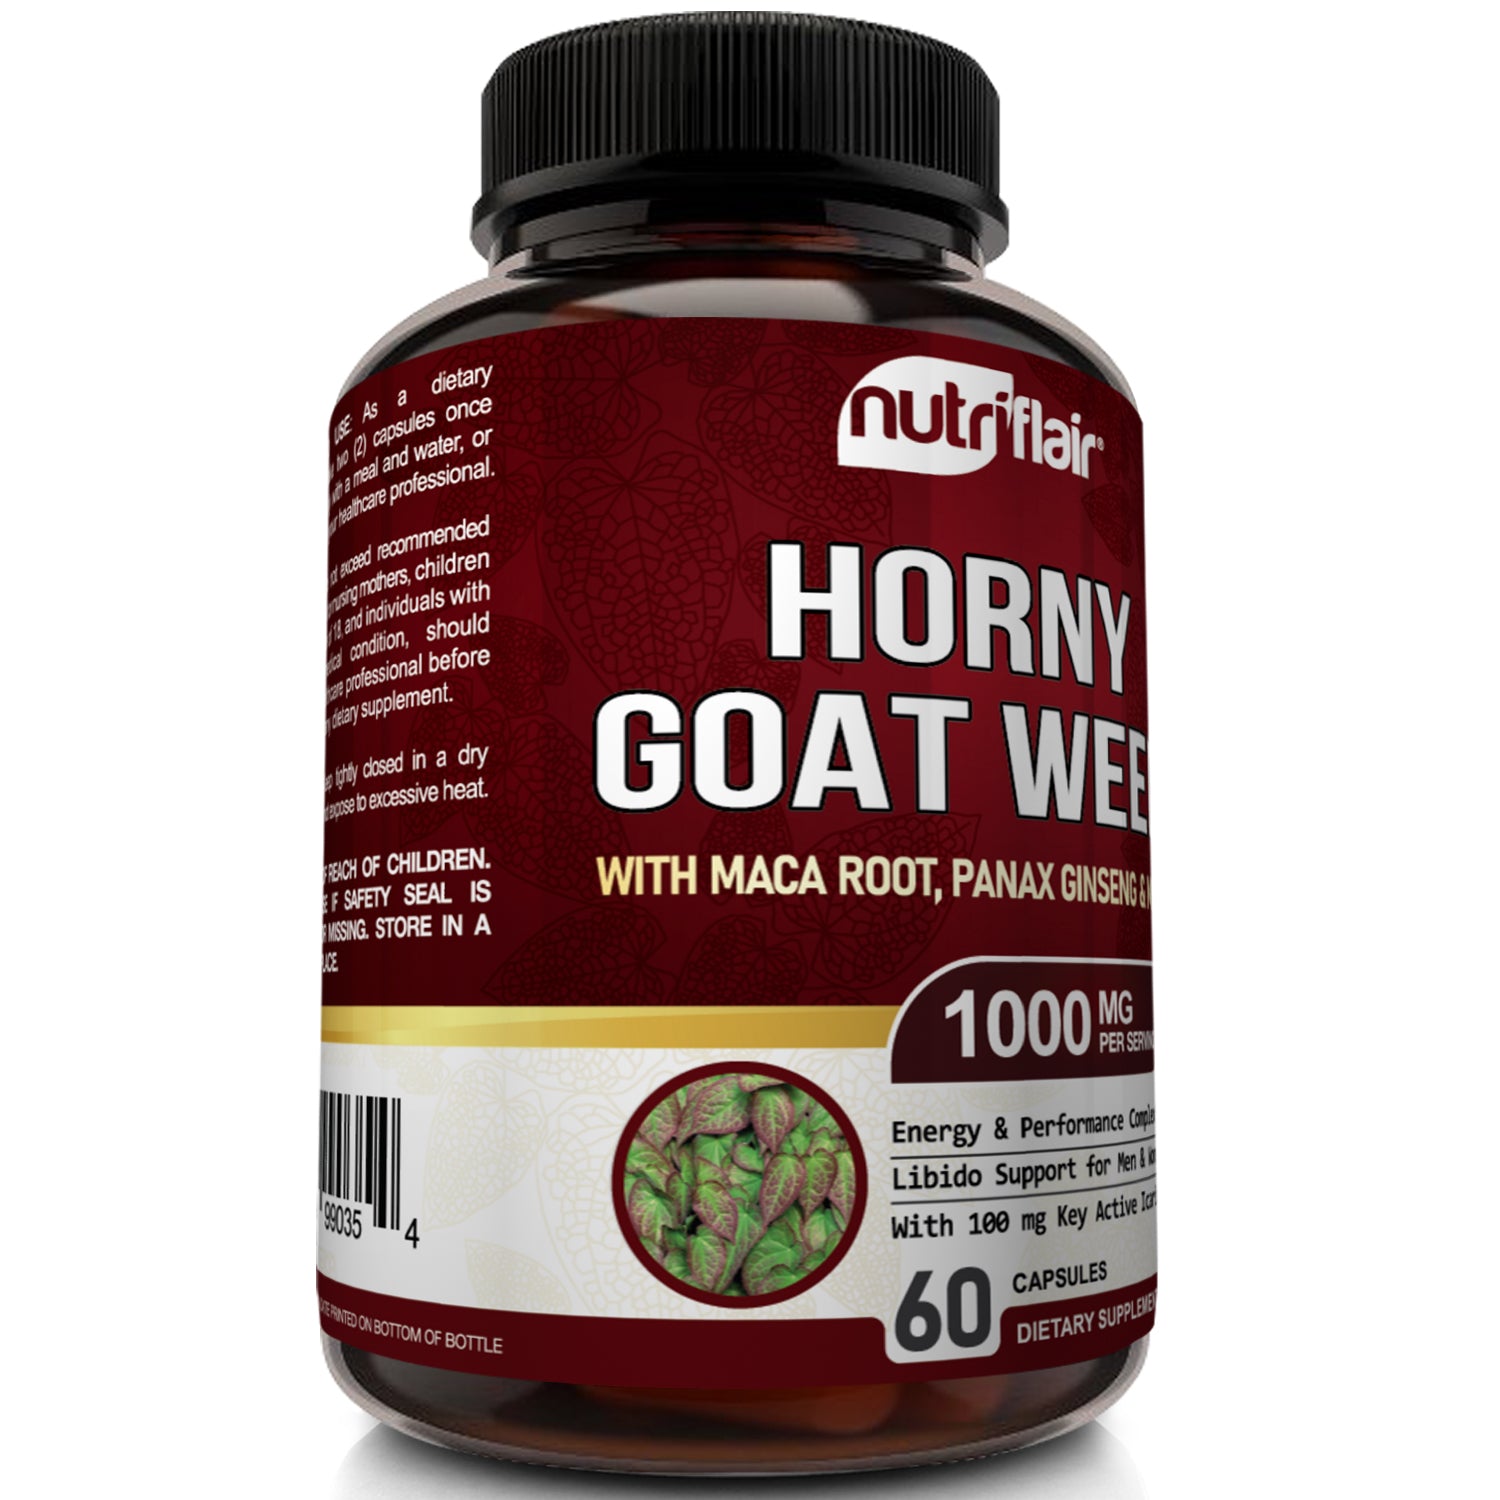 Horny Goat Weed 1000mg With Maca Root 60 Capsules Nutriflair 8220